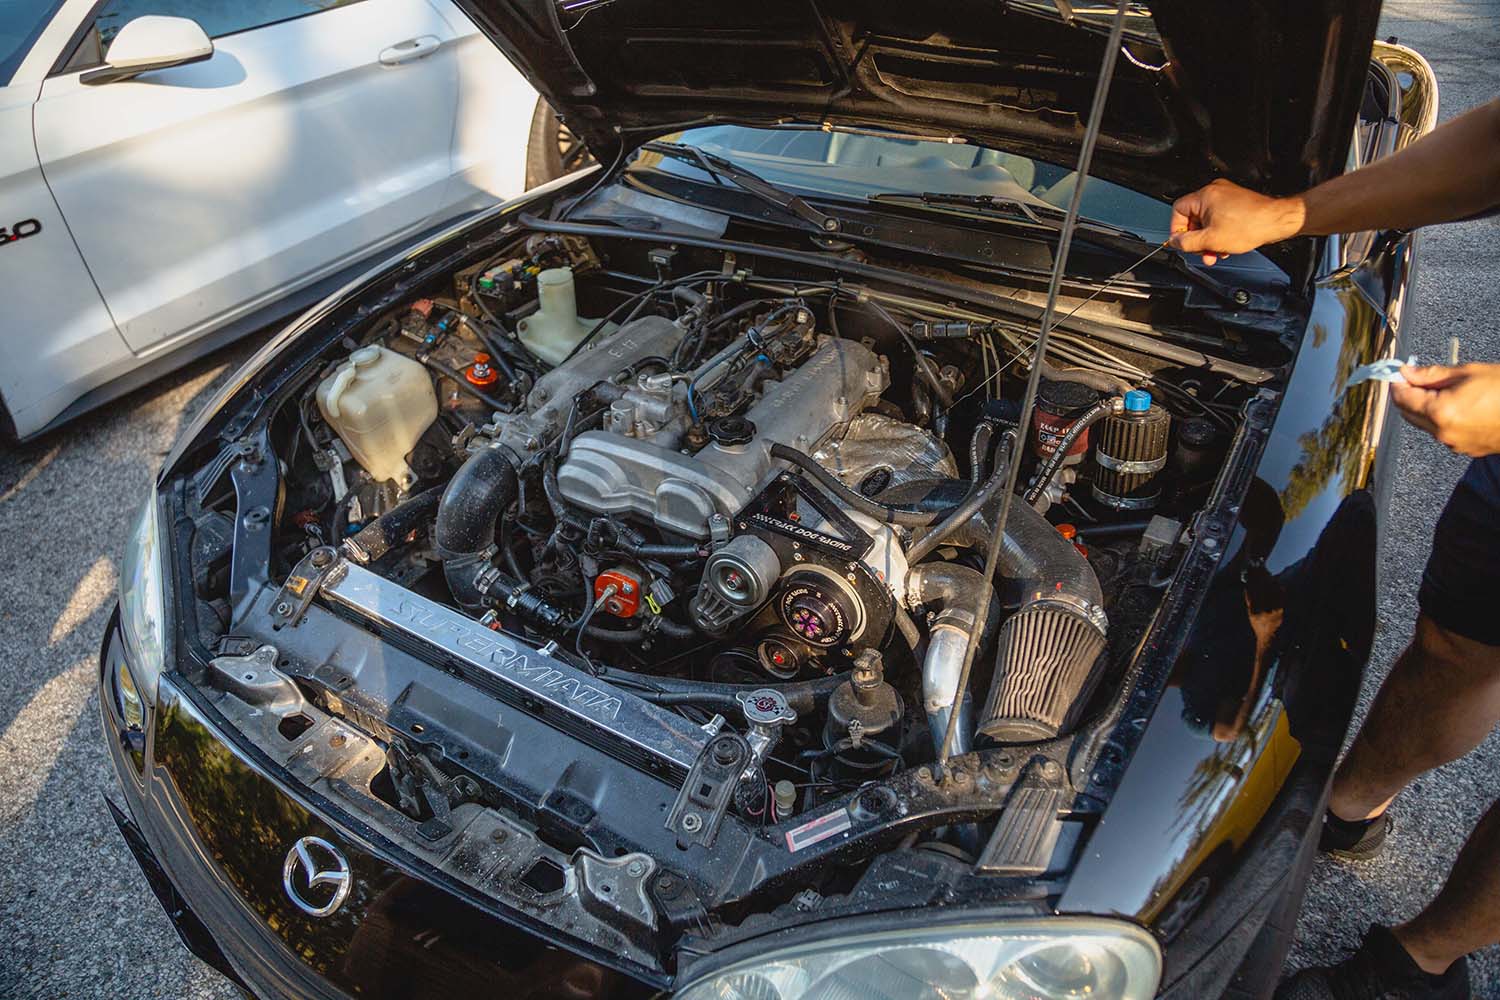 View under the hood of a Mazda vehicle with a person checking the engine oil